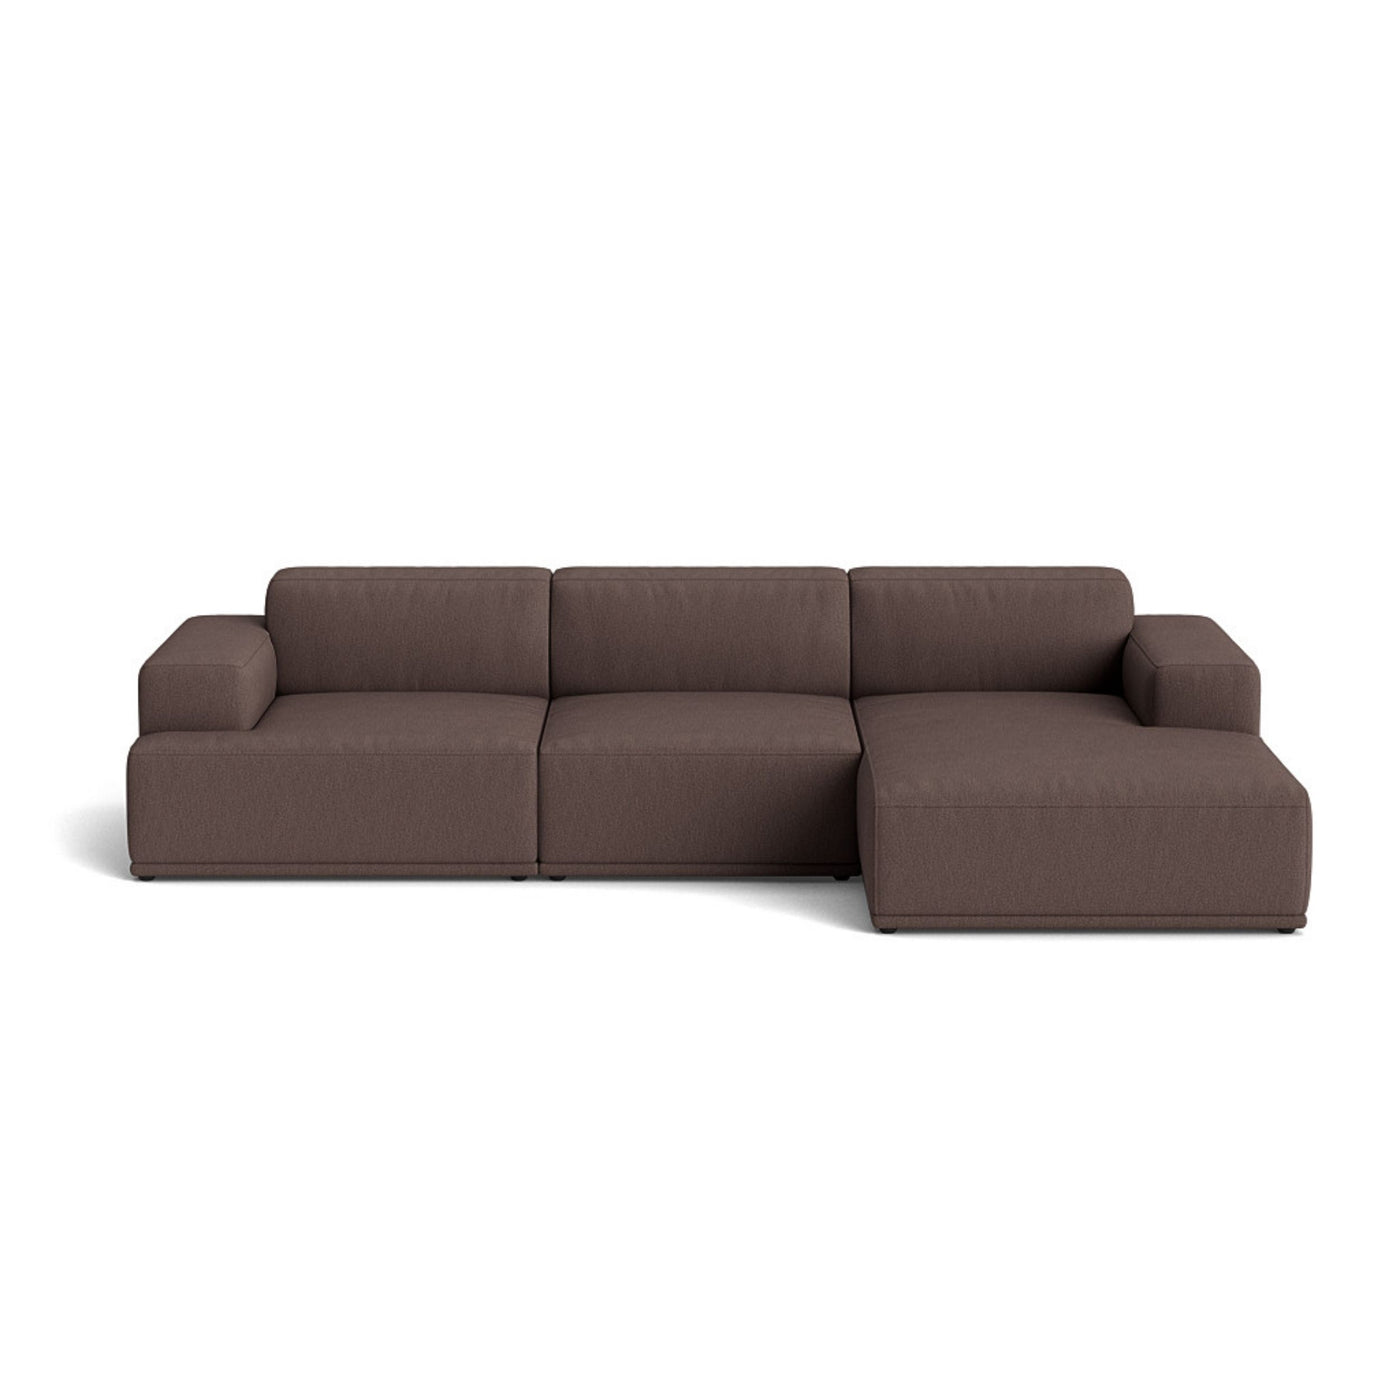 Muuto Connect Soft Modular 3 Seater Sofa, configuration 3. Made-to-order from someday designs. #colour_clay-6-red-brown